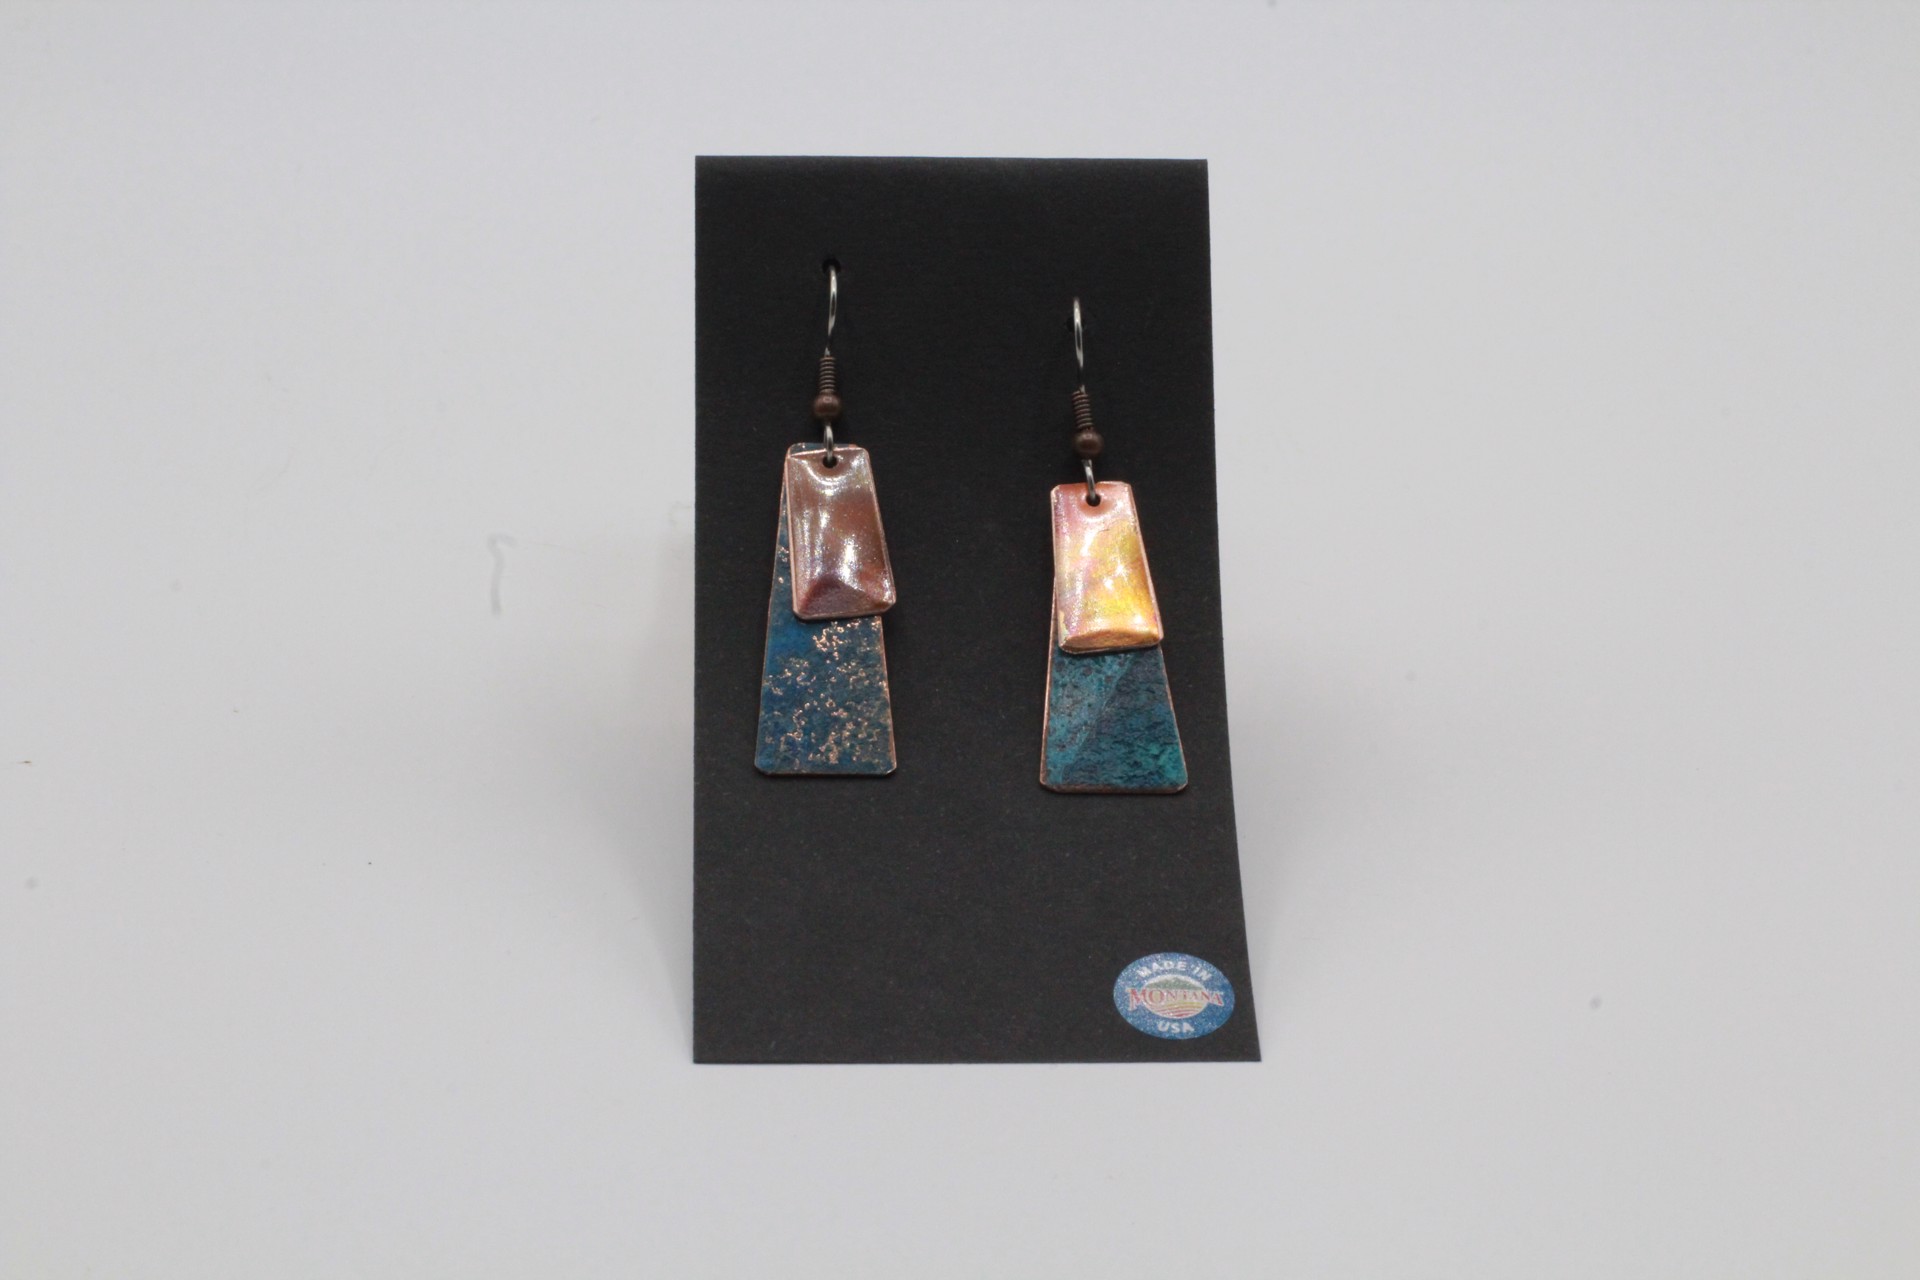 Aged Copper Earring by Kay Langland